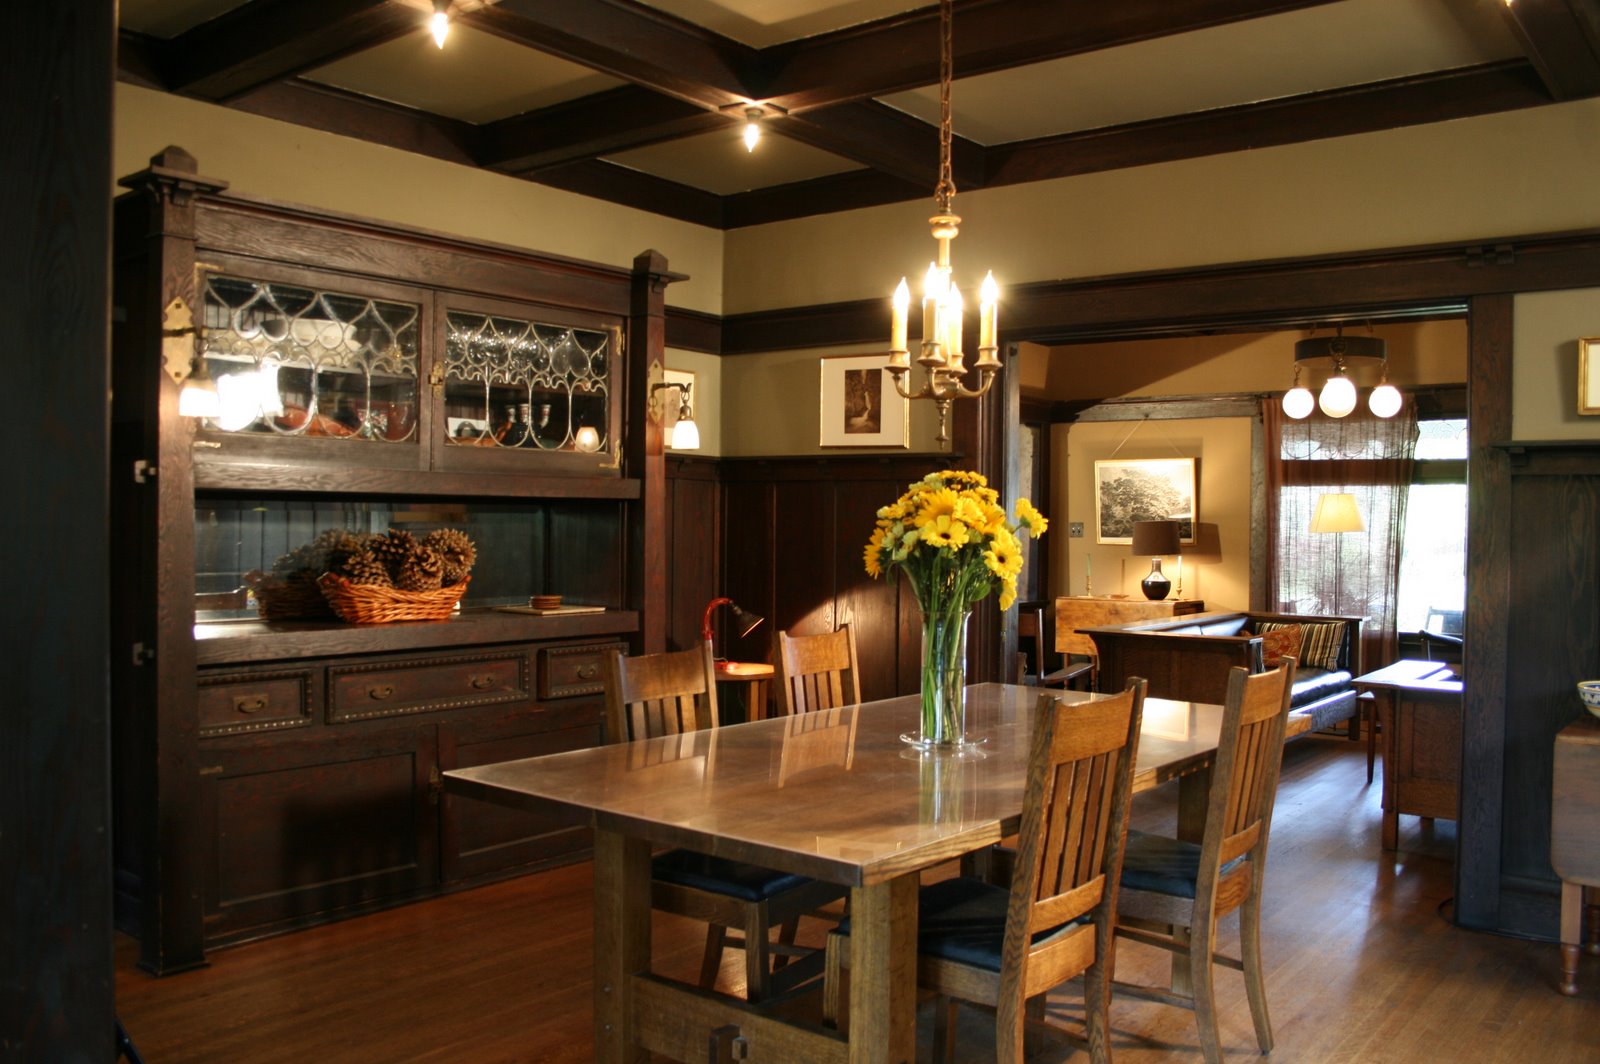 Craftsman Style Interiors   HD Wallpapers Source HD Wallpapers